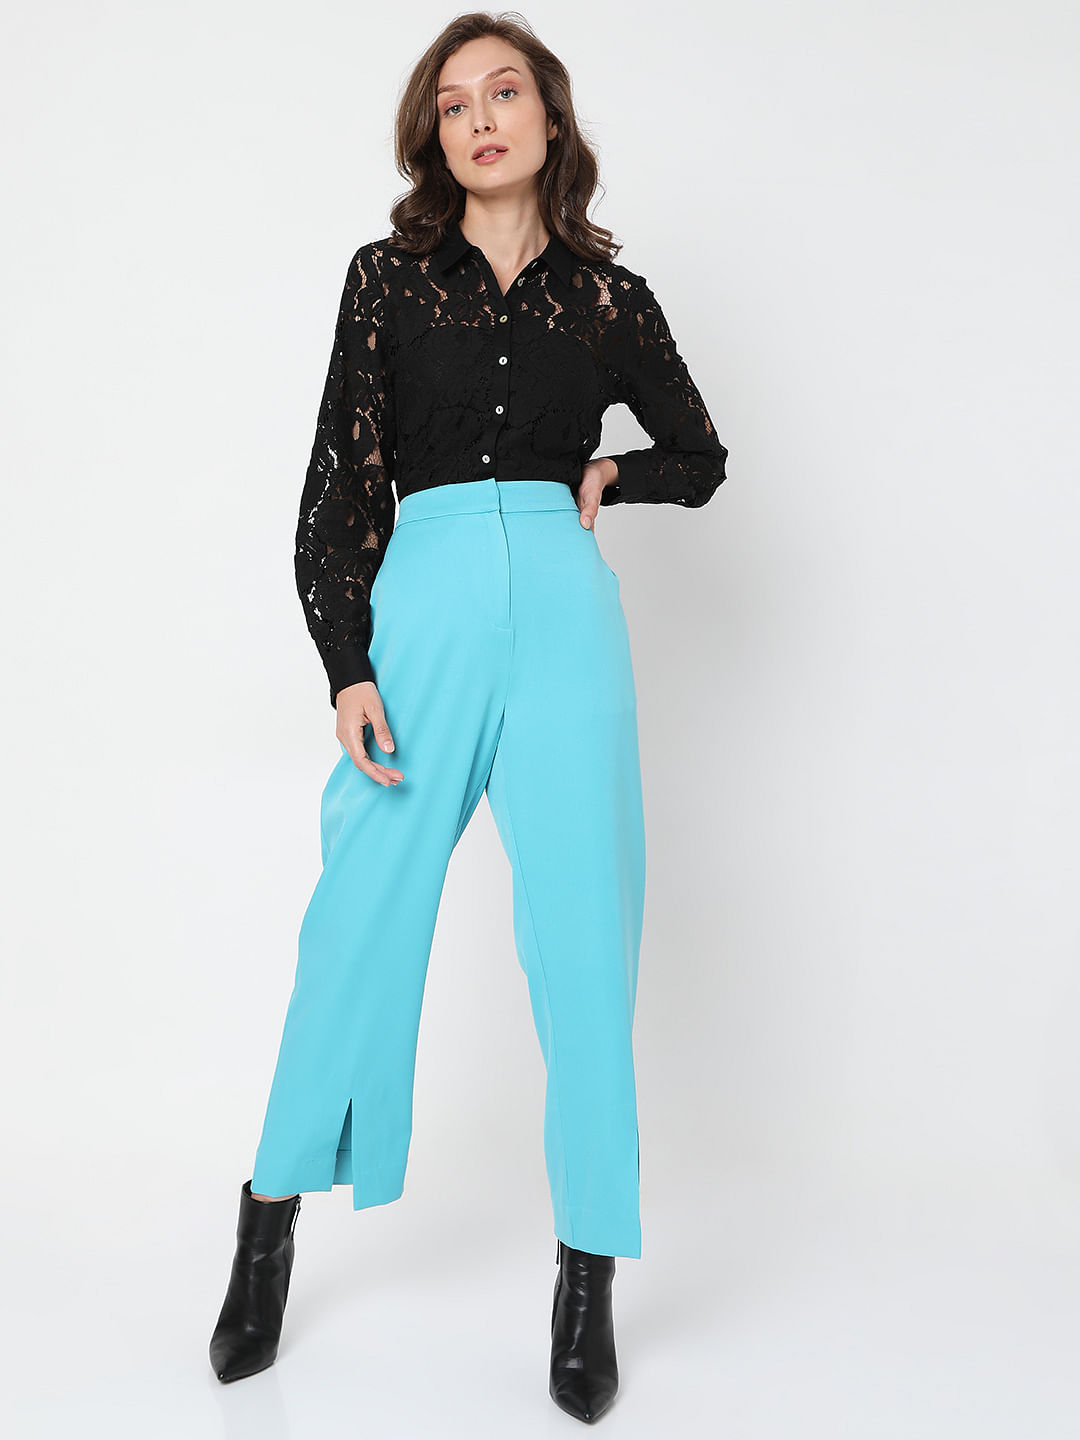 High-waisted tailored trousers - Black - Ladies | H&M IN